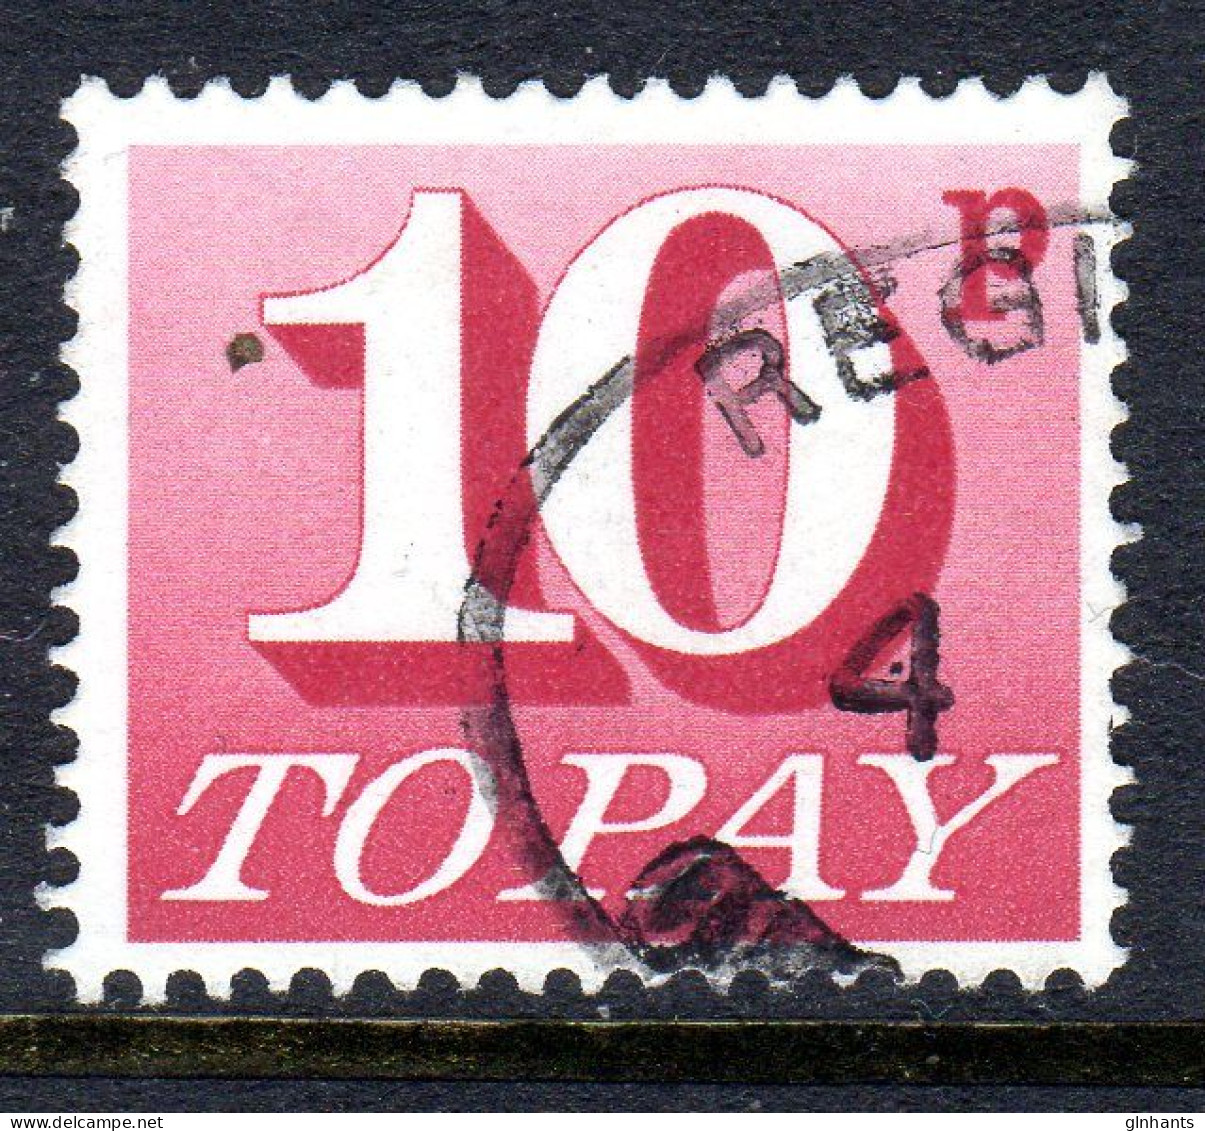 GREAT BRITAIN GB - 1970 POSTAGE DUE 10p STAMP FINE USED SG D84 REF B - Postage Due